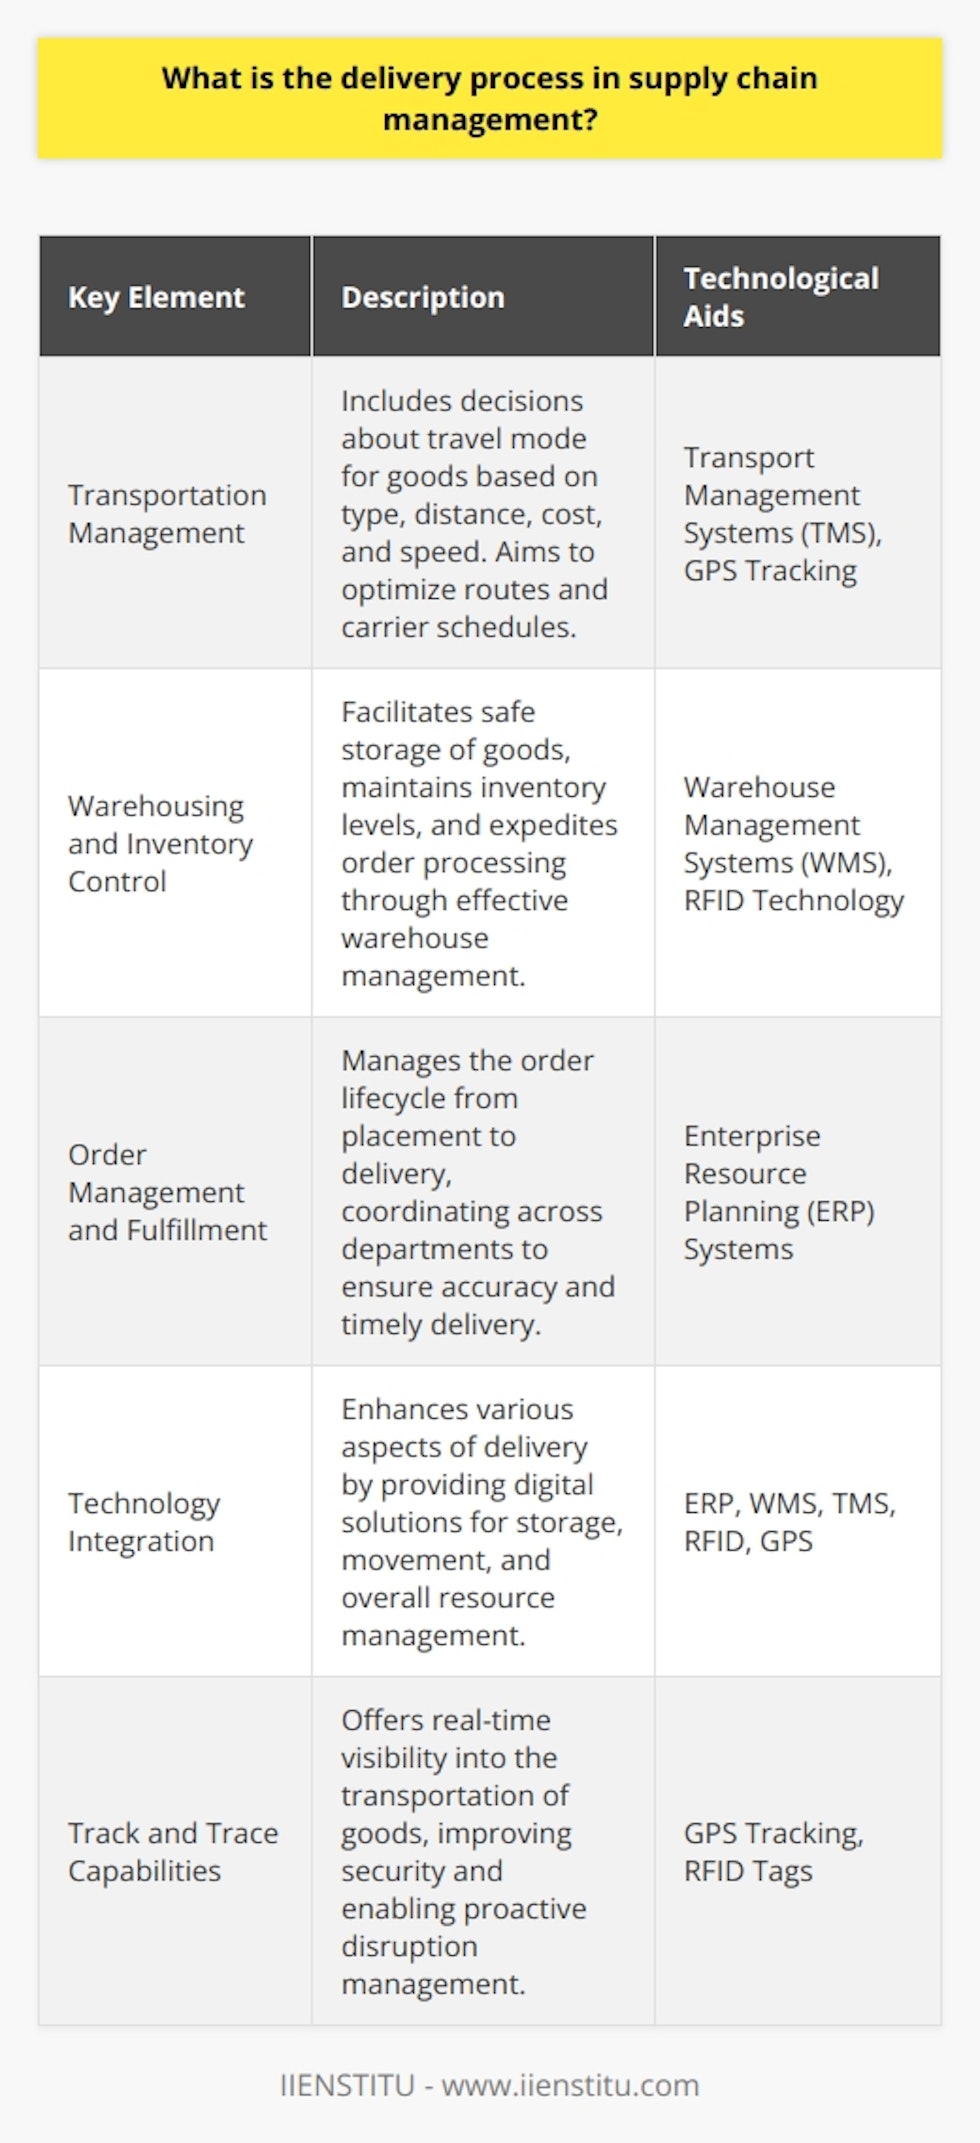 The delivery process is a vital element within the broad field of supply chain management, as it orchestrates the physical movement of goods from suppliers to end consumers. This process is intricate and multi-faceted, requiring careful synchronization of several components to ensure that customers' needs are satisfied with maximum efficiency.Key Elements of the Delivery Process:1. Transportation Management:Transportation is the backbone of the delivery process, thrumming with decisions about which mode of transport to select—be it truck, rail, sea, or air. The variables dictating these decisions include the type and volume of goods, geographic distance, cost considerations, and required delivery speed. A well-coordinated transport schedule aligns with carrier availability, optimizes routes, and ultimately minimizes transit times and costs.2. Warehousing and Inventory Control:Warehouses serve as the holding grounds for goods before they are dispatched for delivery. Effective warehouse management ensures that goods are safely stored, and inventory levels are meticulously maintained to prevent shortages or overstocking. High-efficiency warehouses are equipped to quickly process orders, including tasks such as picking, packaging, and labeling, which accelerates the overall delivery timeline.3. Order Management and Fulfillment:The moment an order is placed, the order management system springs into action, guiding the order through verification, processing, and into the delivery queue. It organizes the workflow to ensure that the right products are dispatched to their intended destinations. Clear and constant communication is pivotal across sales, operations, and customer service departments to provide a transparent and seamless order-to-delivery experience for the client.Technological Innovations Enhancing the Delivery Process:The integration of technology bolsters the efficacy of delivery processes. For instance, Warehouse Management Systems (WMS) lend a digital hand in organizing the storage and movement of goods within the warehouse. Transport Management Systems (TMS) are deployed to select the best transport options and handle the necessary documentation. Meanwhile, Enterprise Resource Planning (ERP) systems stitch together data across the organization, including inventory levels, projecting a unified view of the business resources.Tracking technologies, such as RFID and GPS, provide real-time insights into the location of goods, adding layers of visibility and security during transit. These tools help preempt and address potential disruptions, ensuring that goods flow unhindered from source to destination.The agile and strategic orchestration of each phase within the delivery process is critical for successfully navigating the all-encompassing journey of goods within the supply chain. Embracing technology further sharpens this edge, enabling organizations like IIENSTITU and others to exceed customer expectations, foster loyalty, and maintain competitiveness in the bustling marketplace of goods and services.